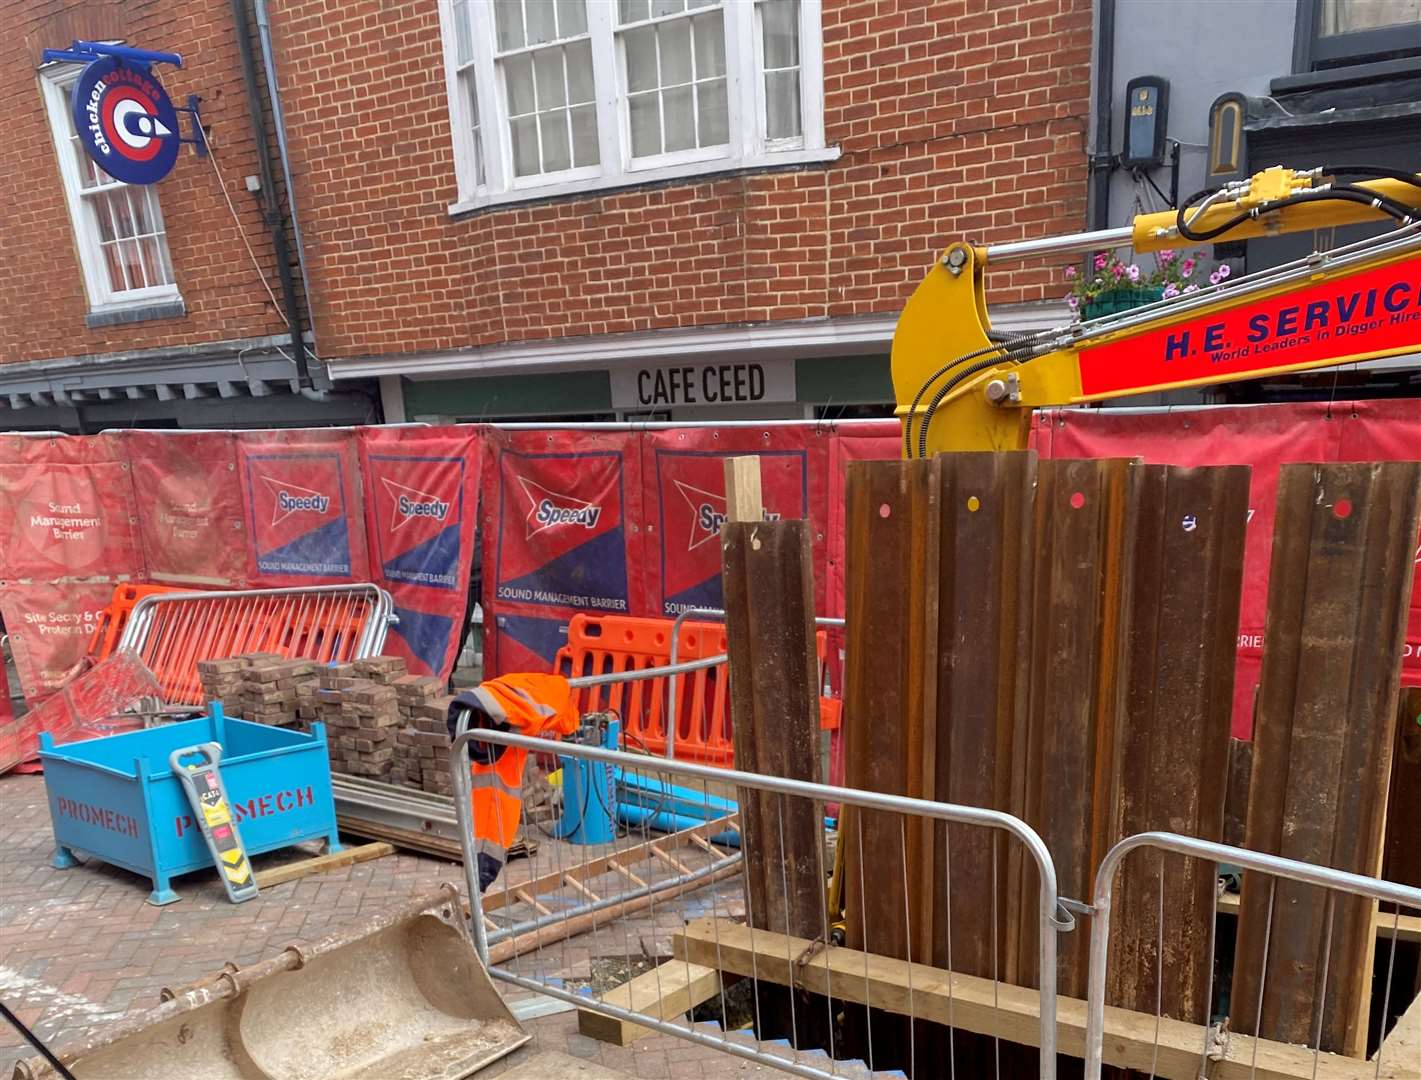 The works on St Peter's Street, Canterbury are being carried out by Southern Water to investigate a sinkhole